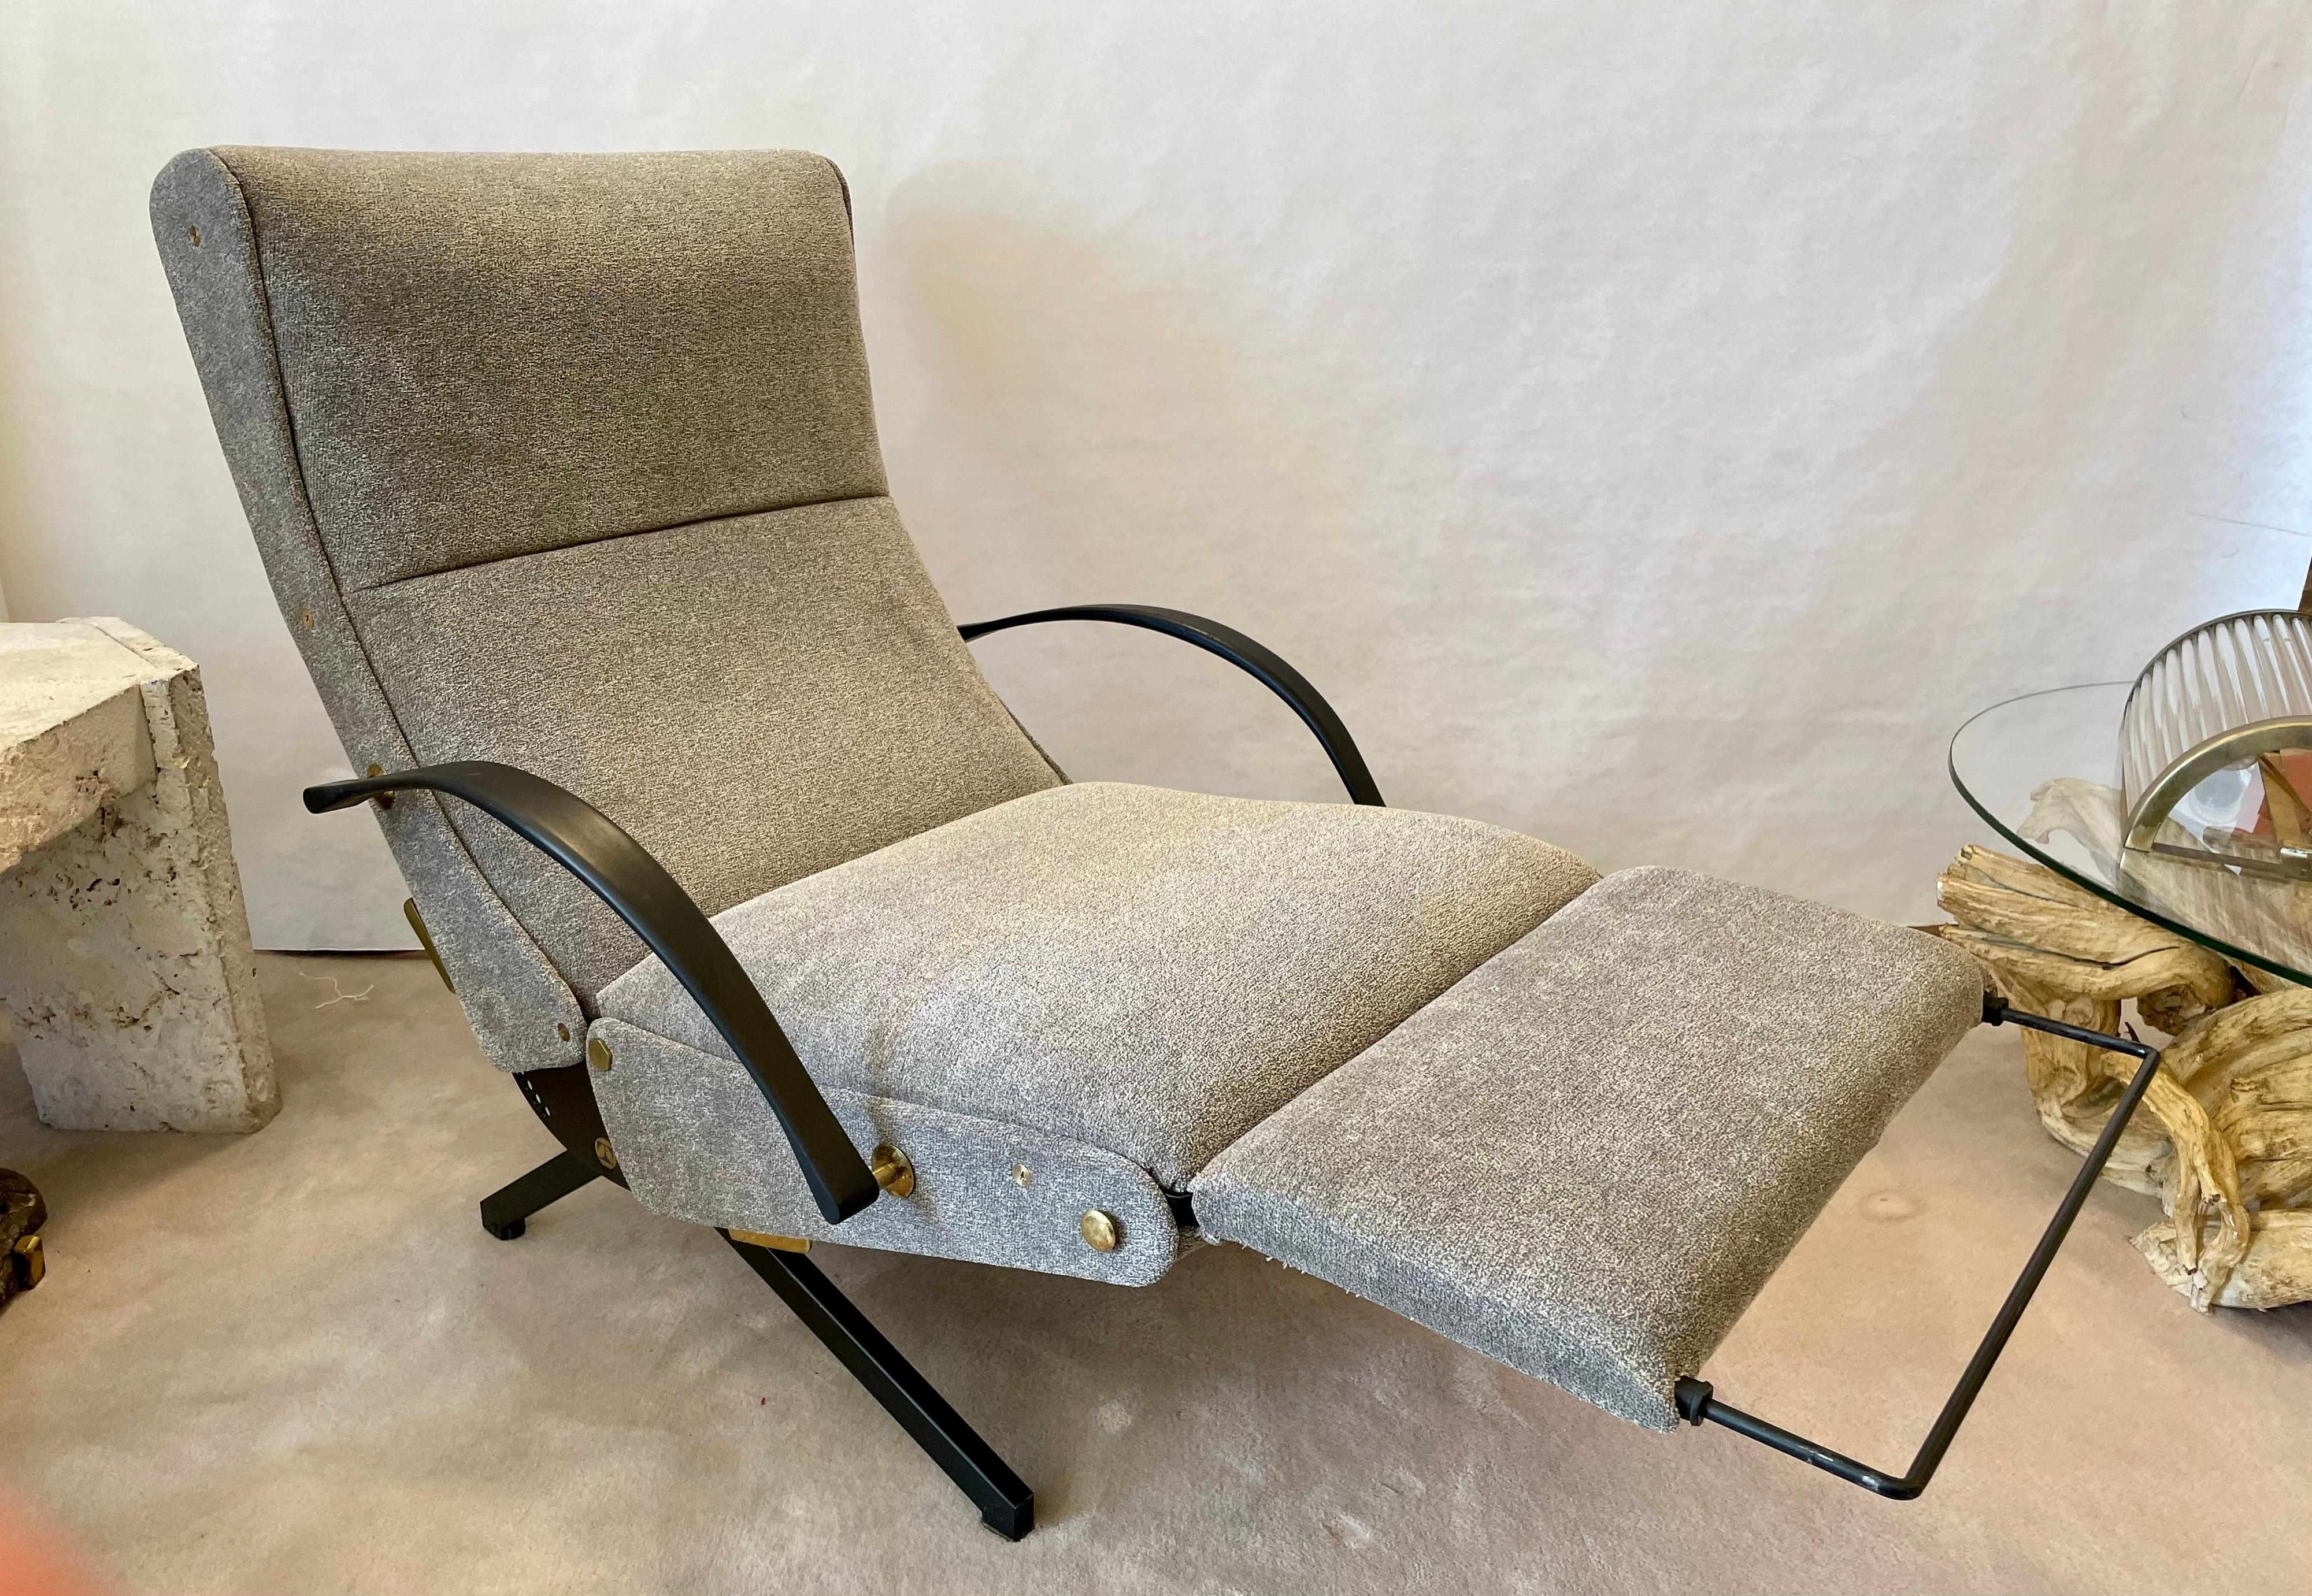 Osvaldo Borsani for Tecno, P40 lounge chair, Italy, 1955.
Early edition P40 lounge chairs by Osvaldo Borsani for Tecno.
Adjustable backrest armrests and seat, an iconic piece of Italian 1950s design.
These pieces feature new fabric, original